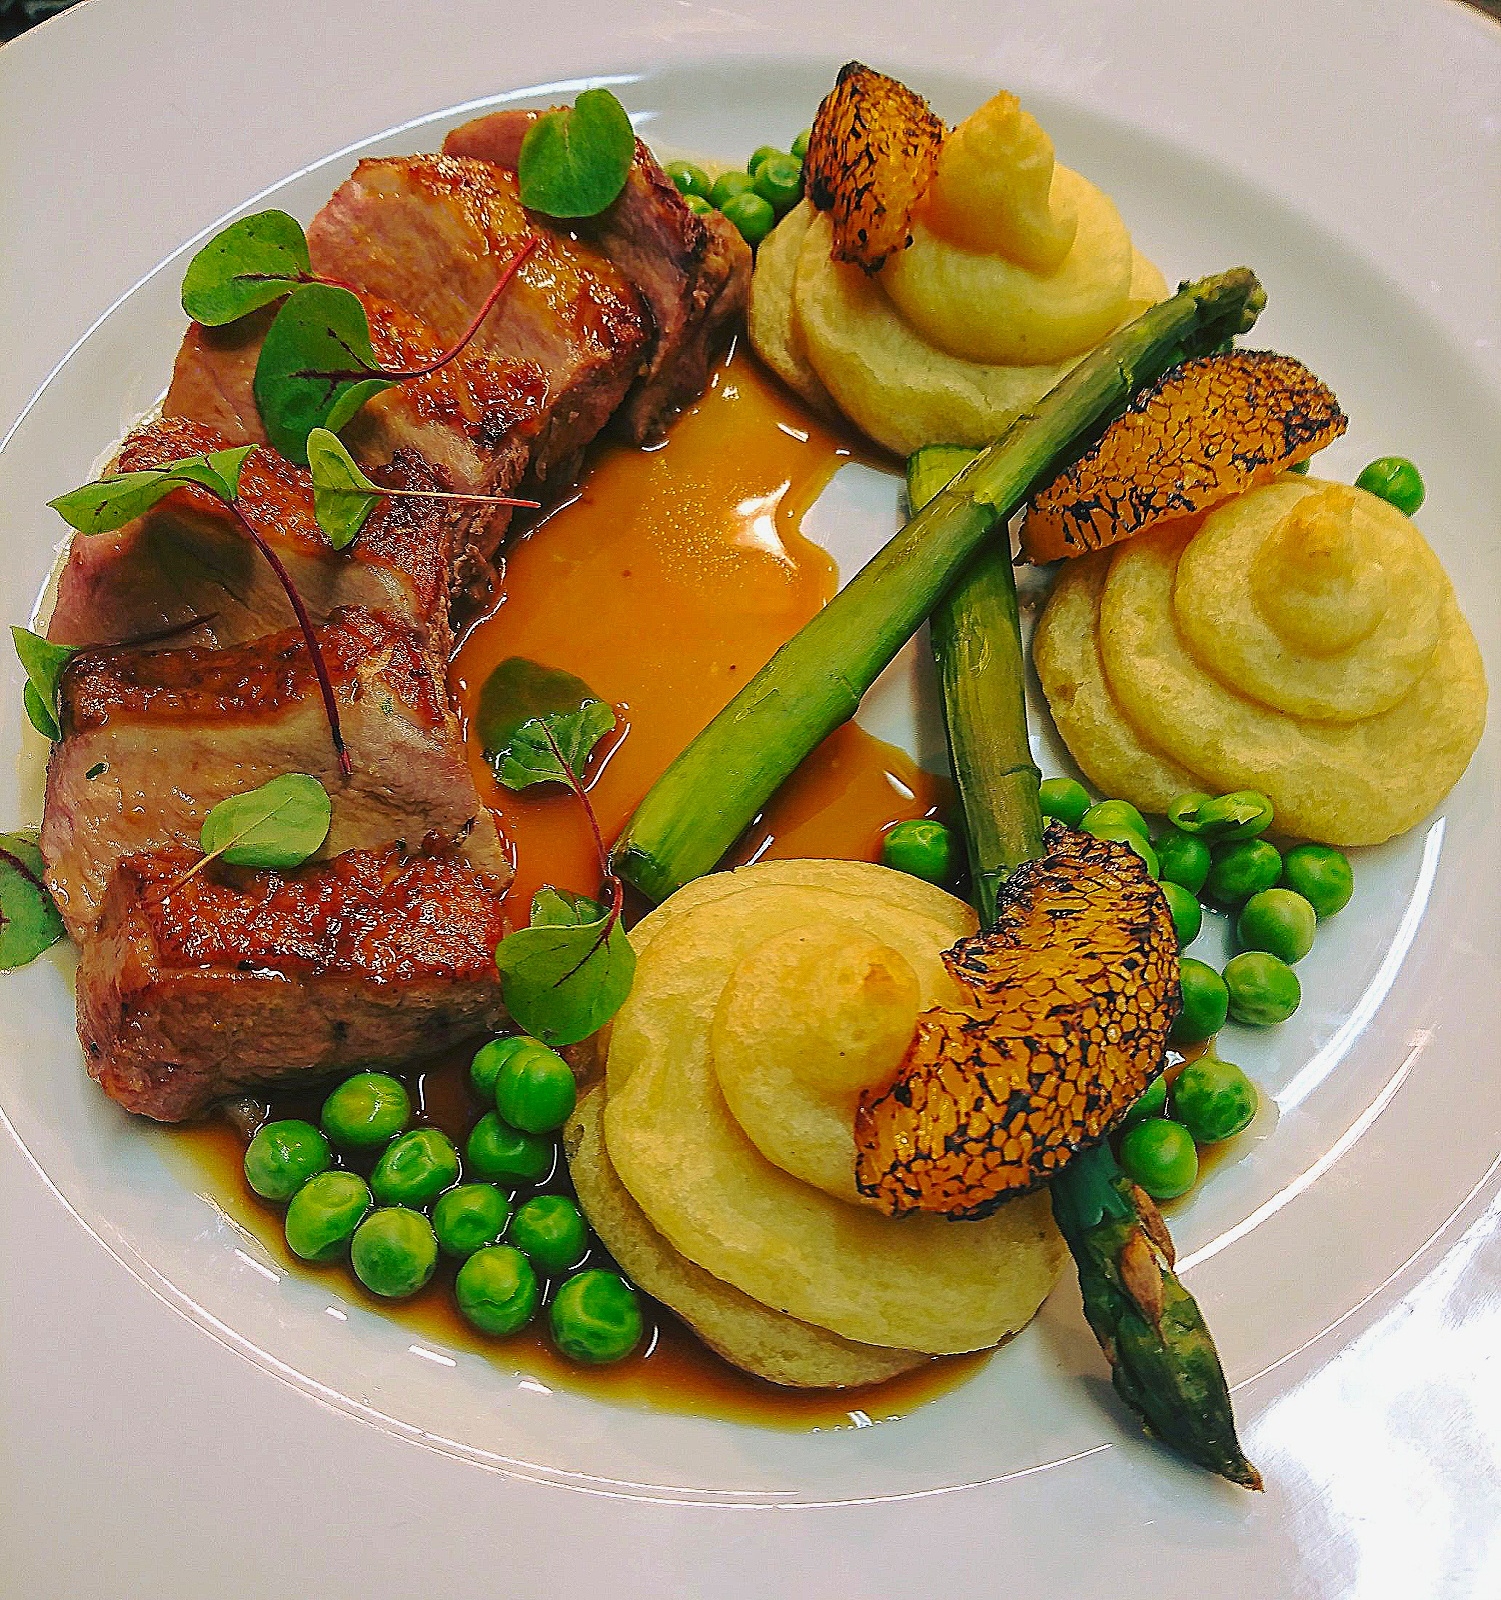 Pan seared duck-breast, duchess potatoes, asparagus, peas, burnt orange segments, finished with orange & thyme-jus